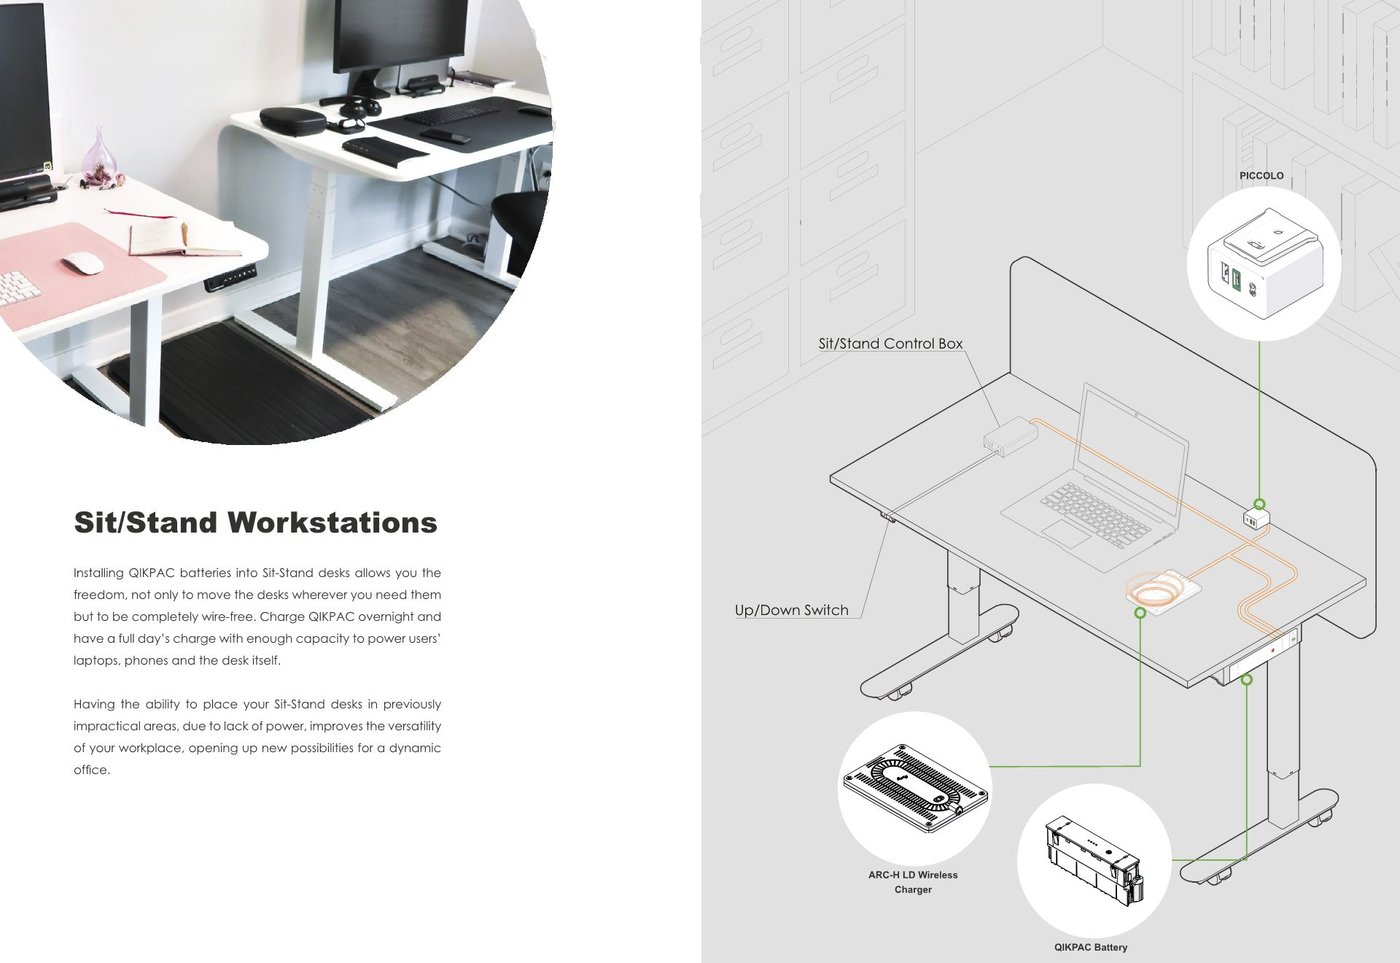 Sit/Stand Workstations